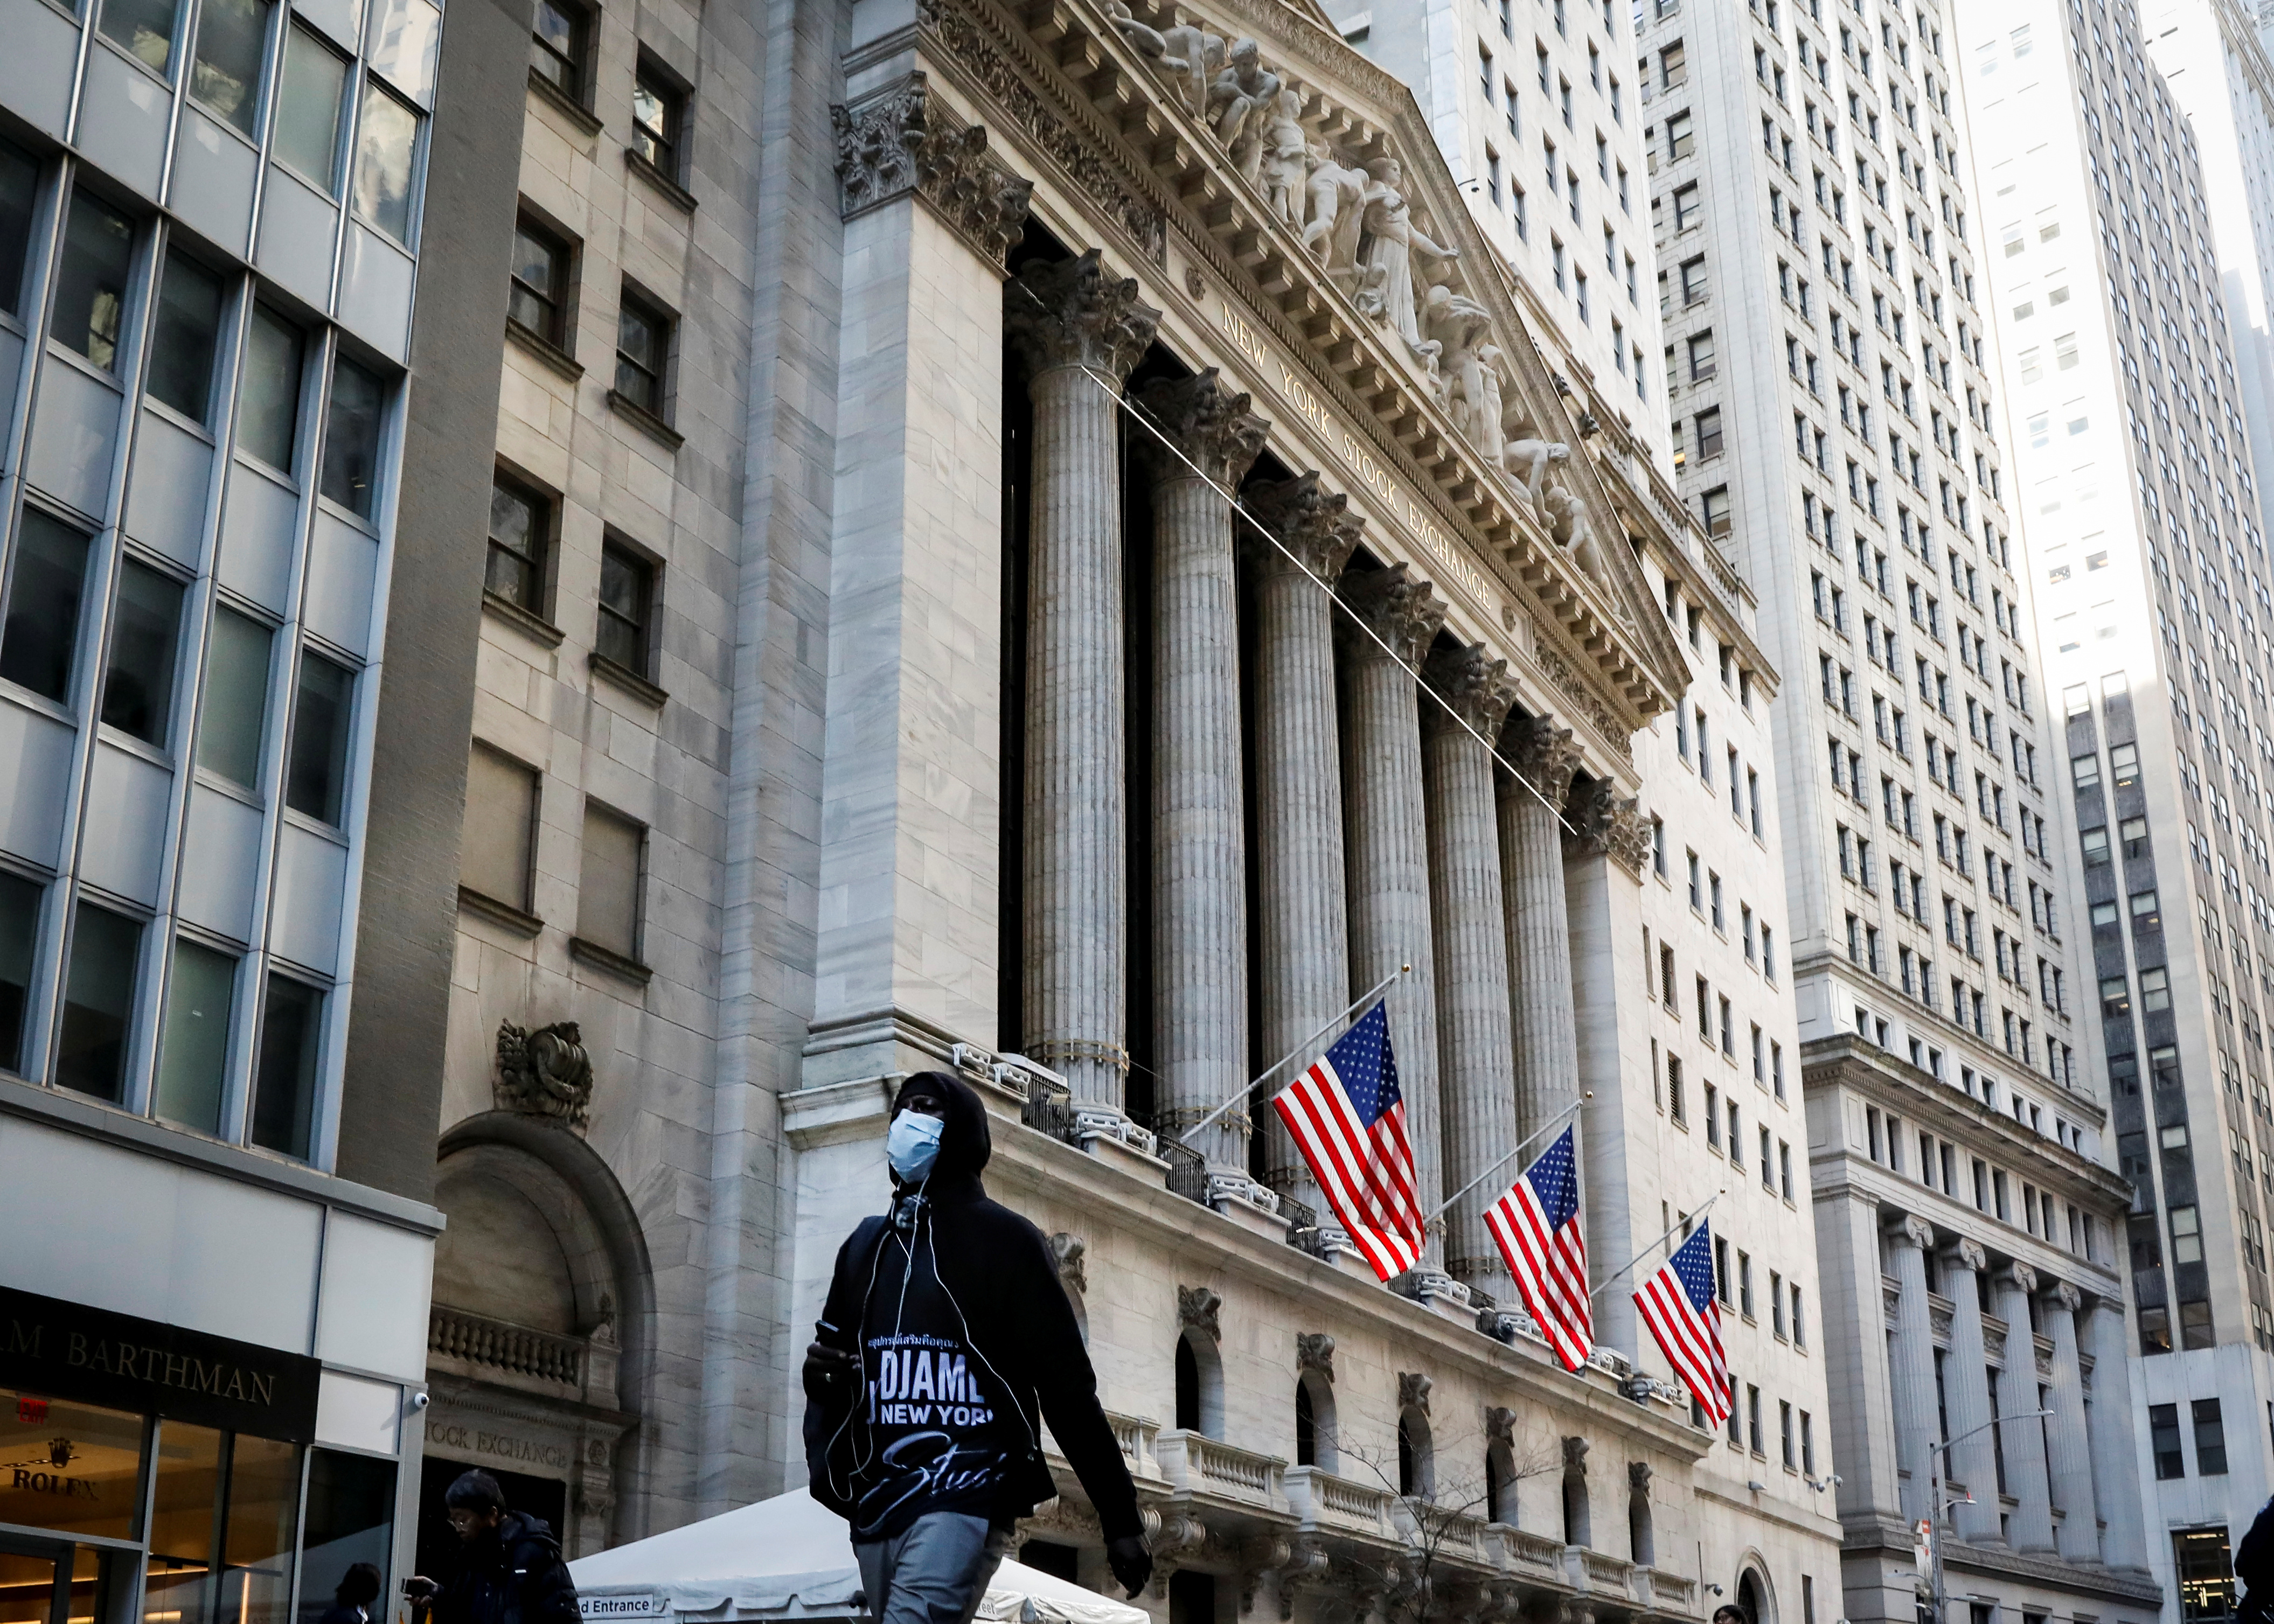 A man wears a mask as he walks near the New York Stock Exchange (NYSE) in the financial district in New York City, U.S., March 2, 2020. REUTERS/Brendan McDermid